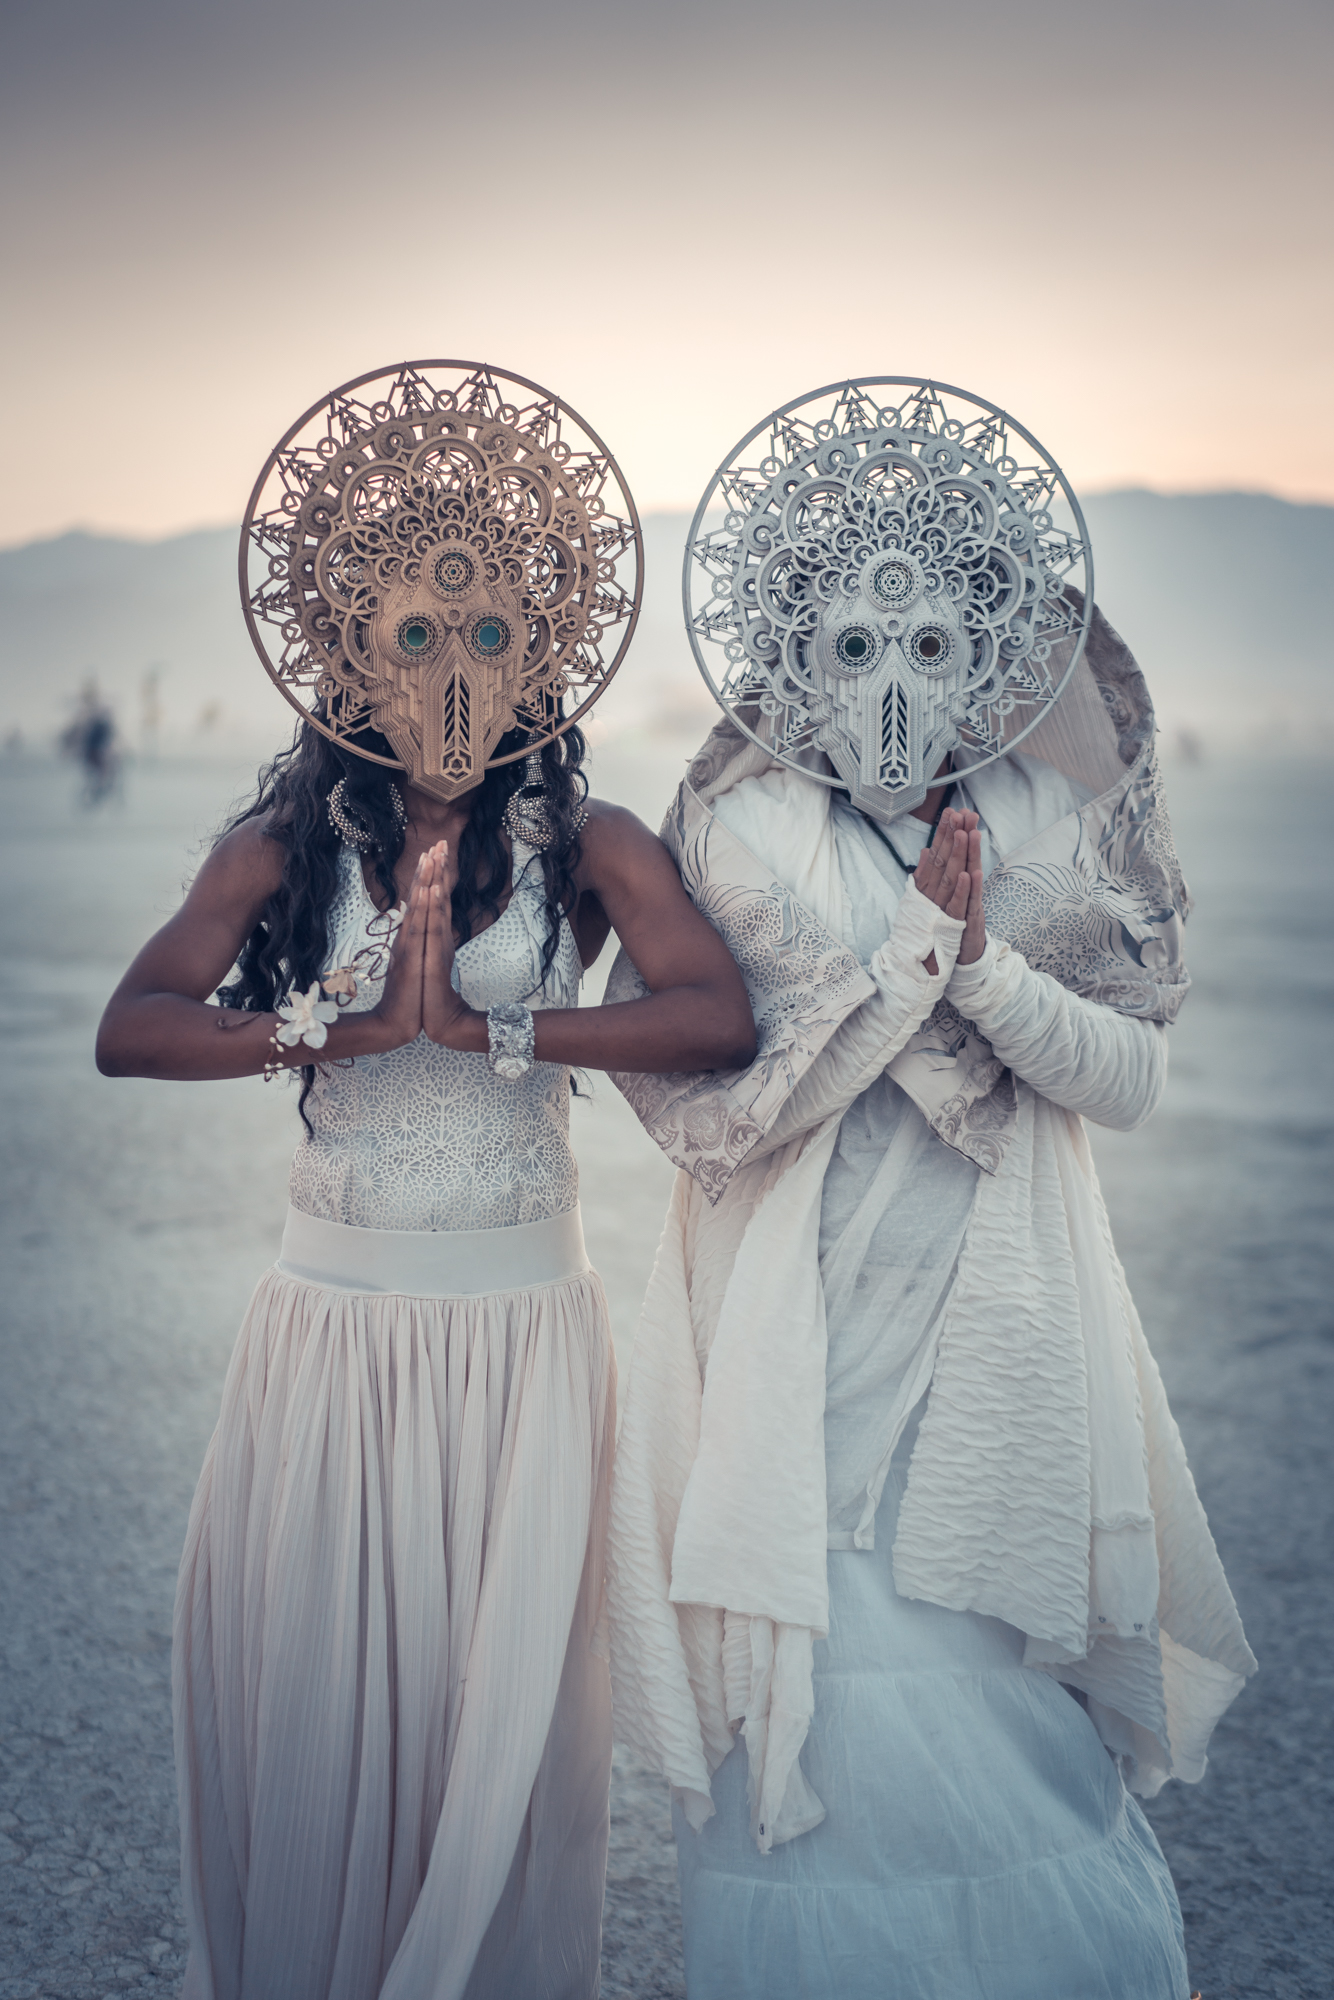 From Playa to Pantheon: Look Inside the Goddess-Themed Wedding That Lit Up  Burning Man -  - The Latest Electronic Dance Music News, Reviews &  Artists